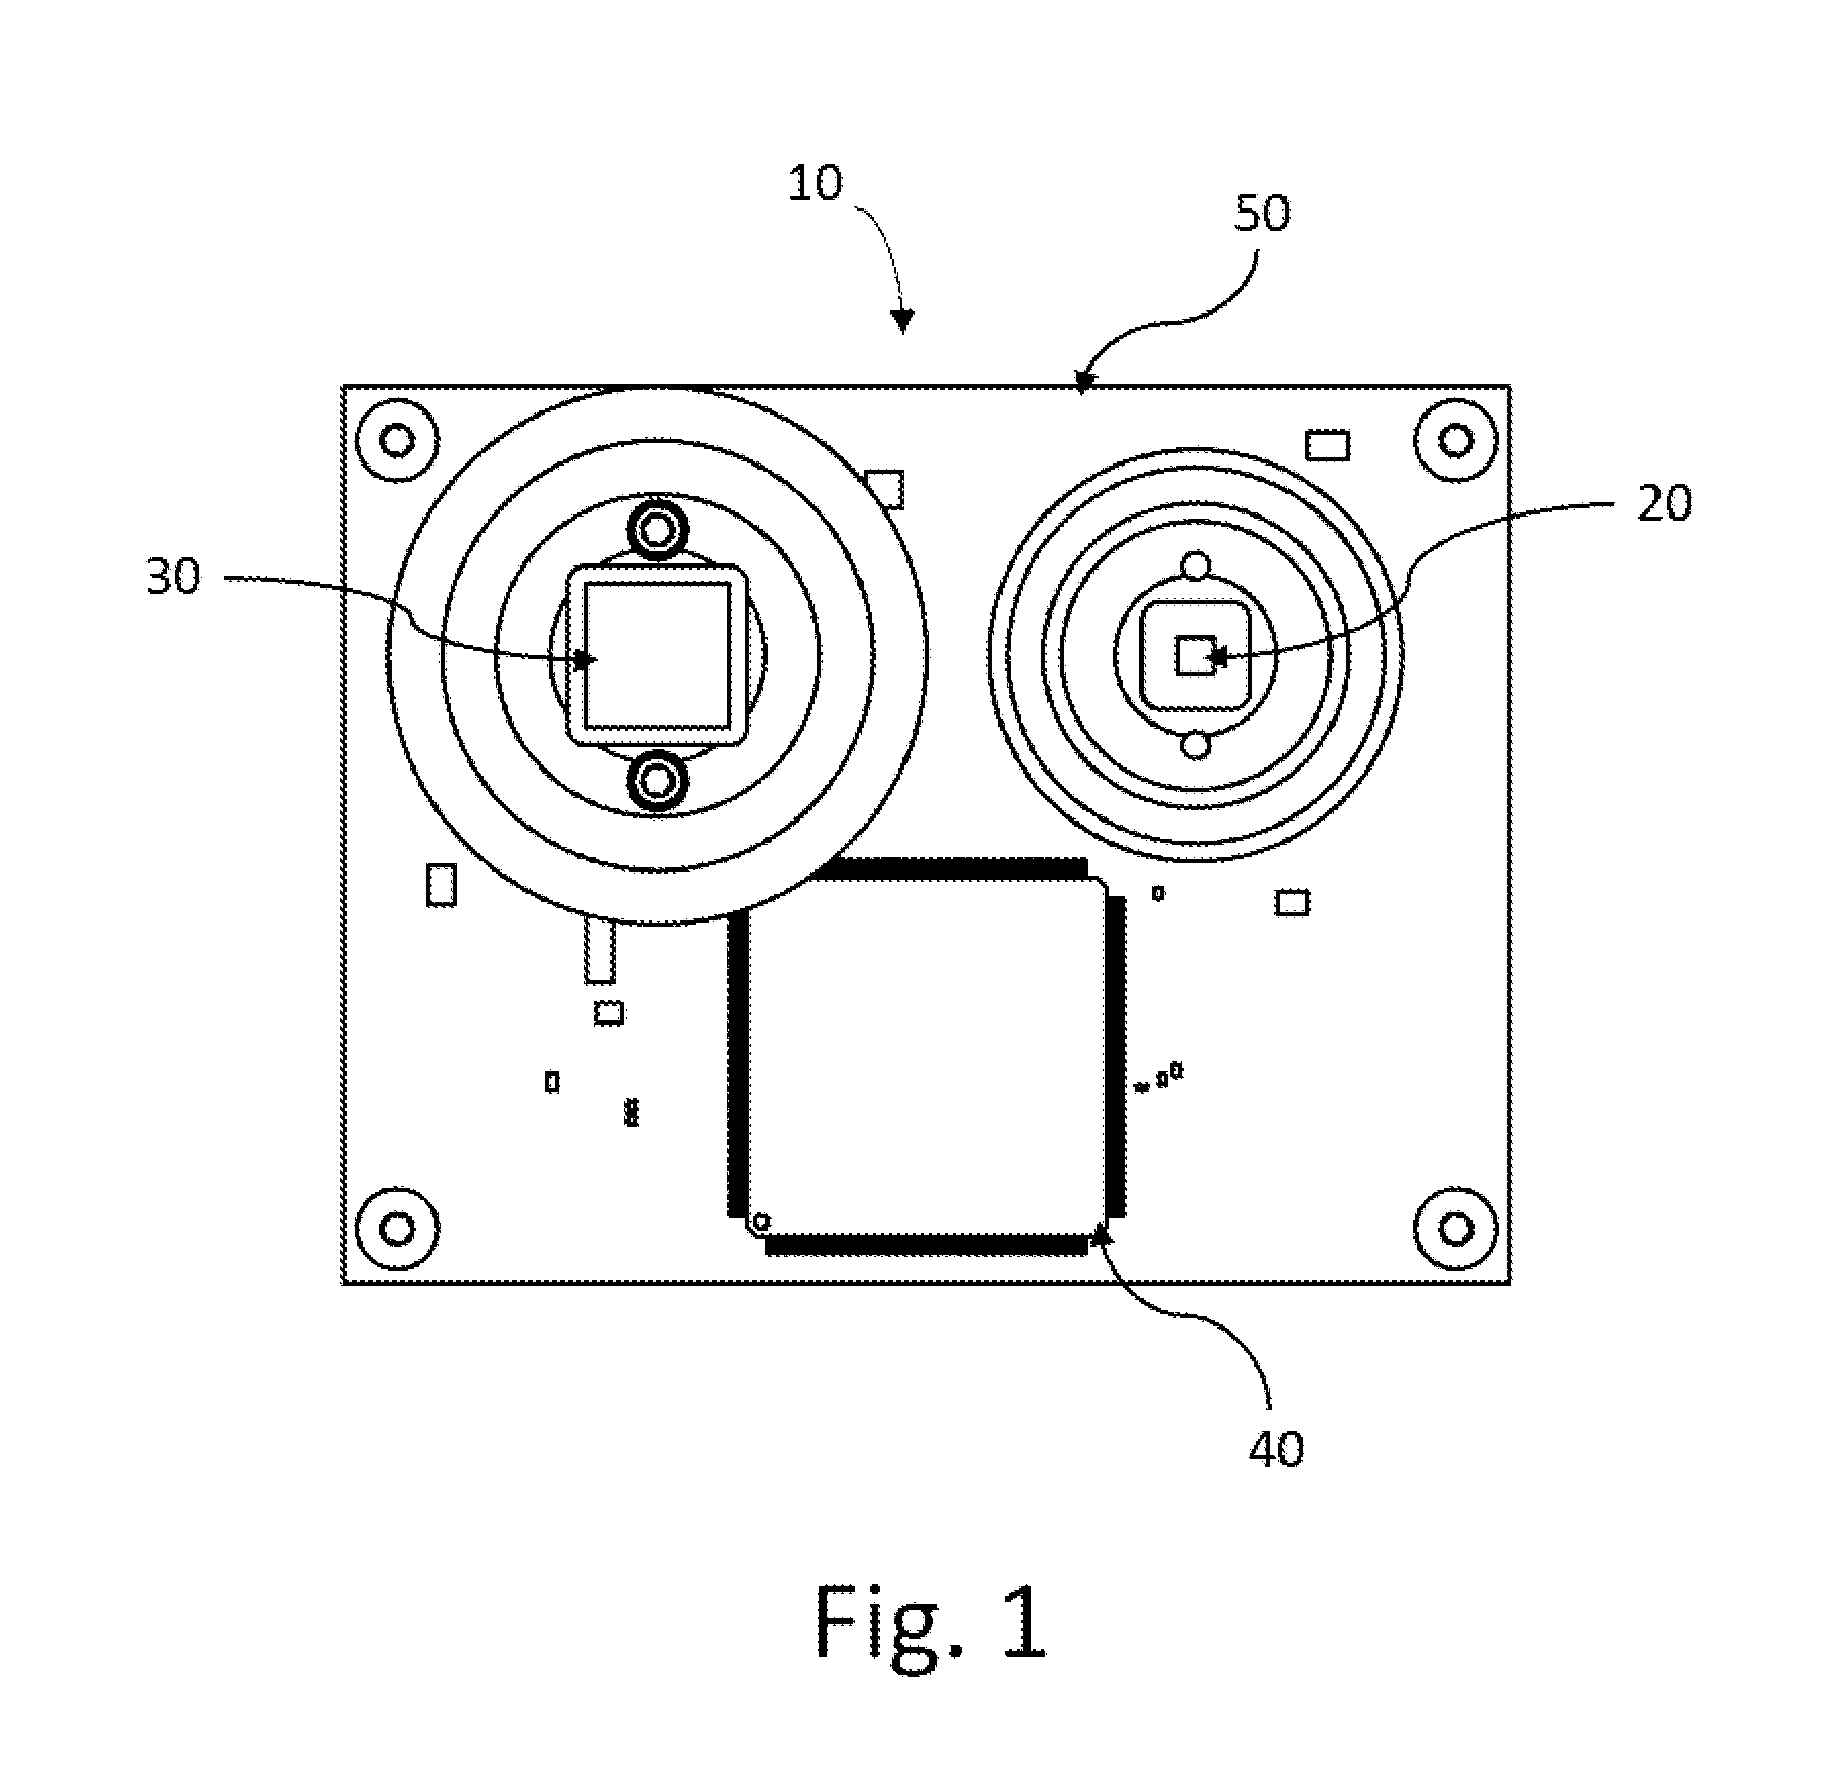 Solid state optical phased array lidar and method of using same